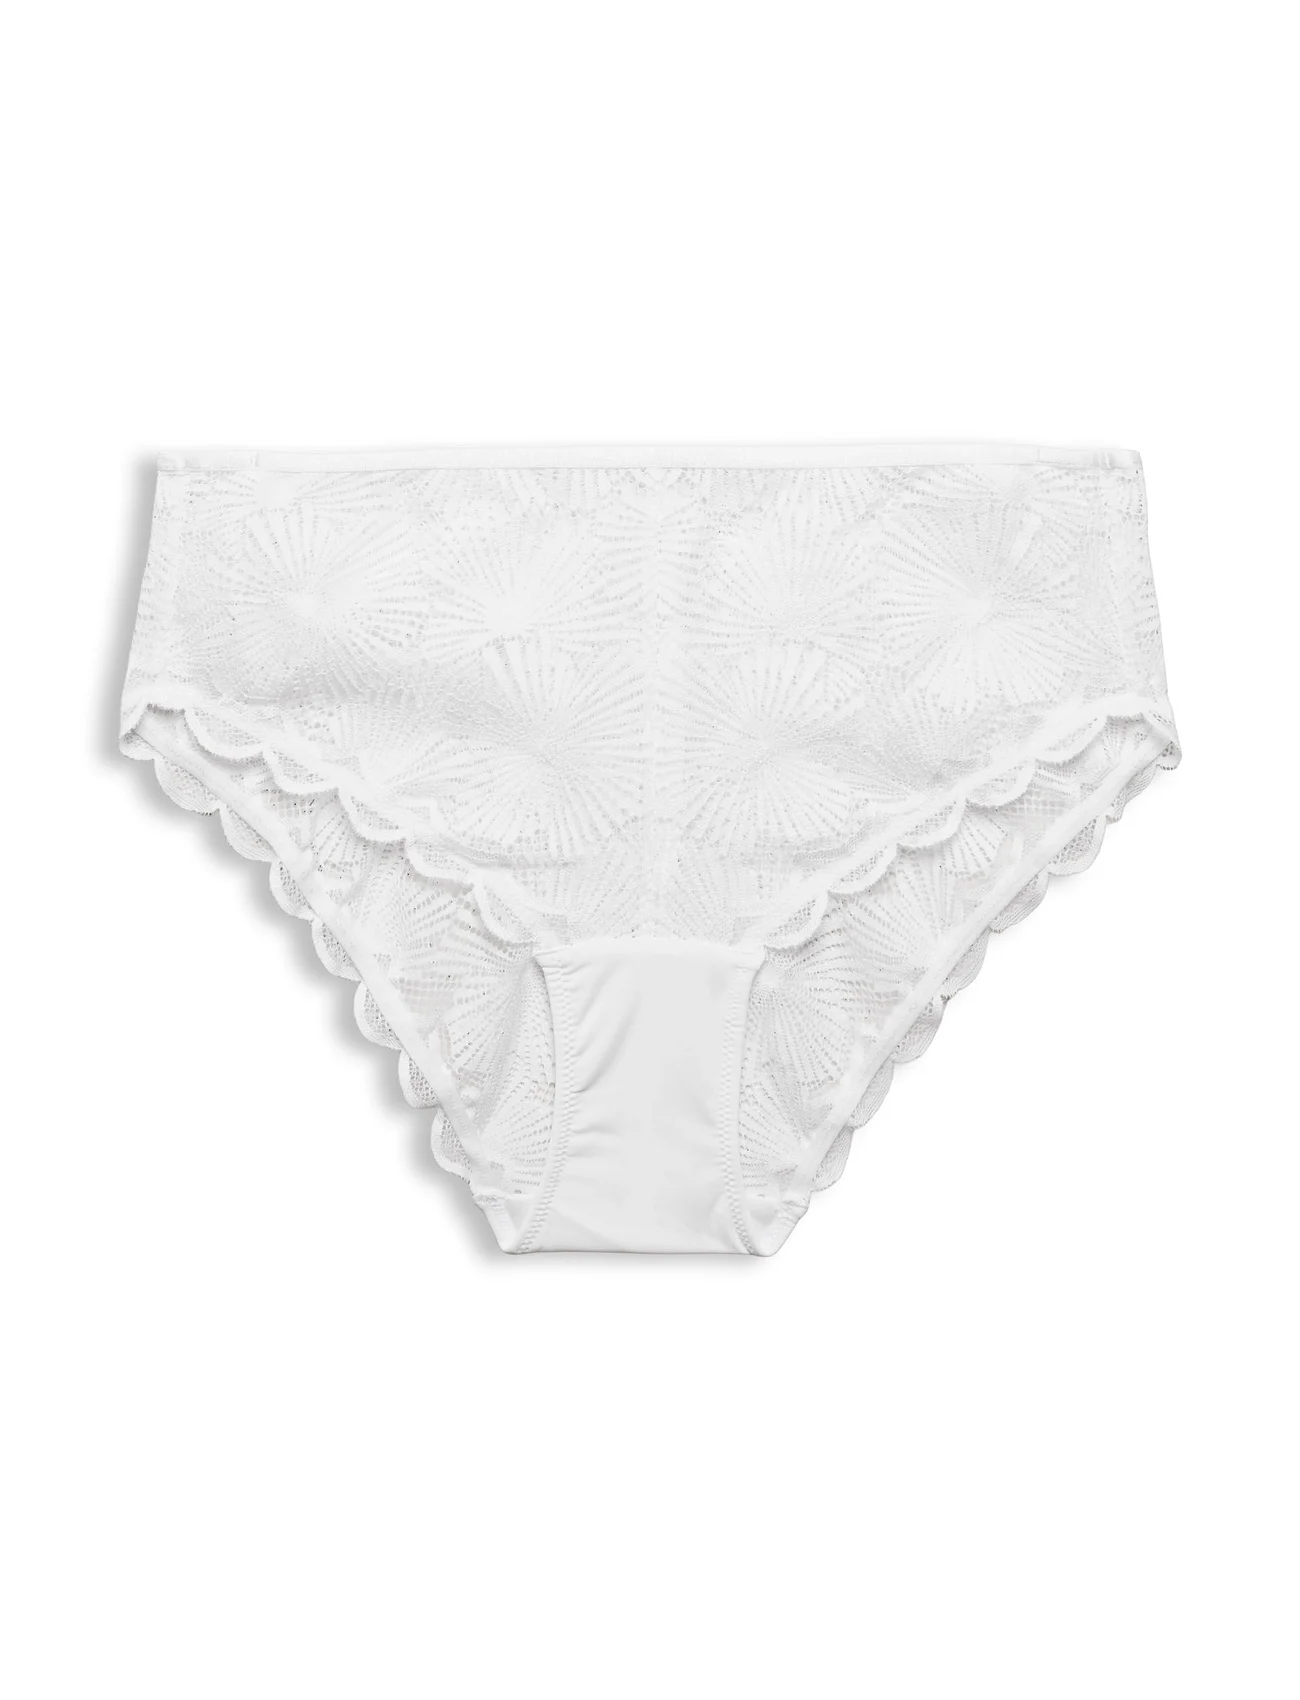 Esprit Bodywear Women - Recycled: briefs with lace - laveste priser - white - 0